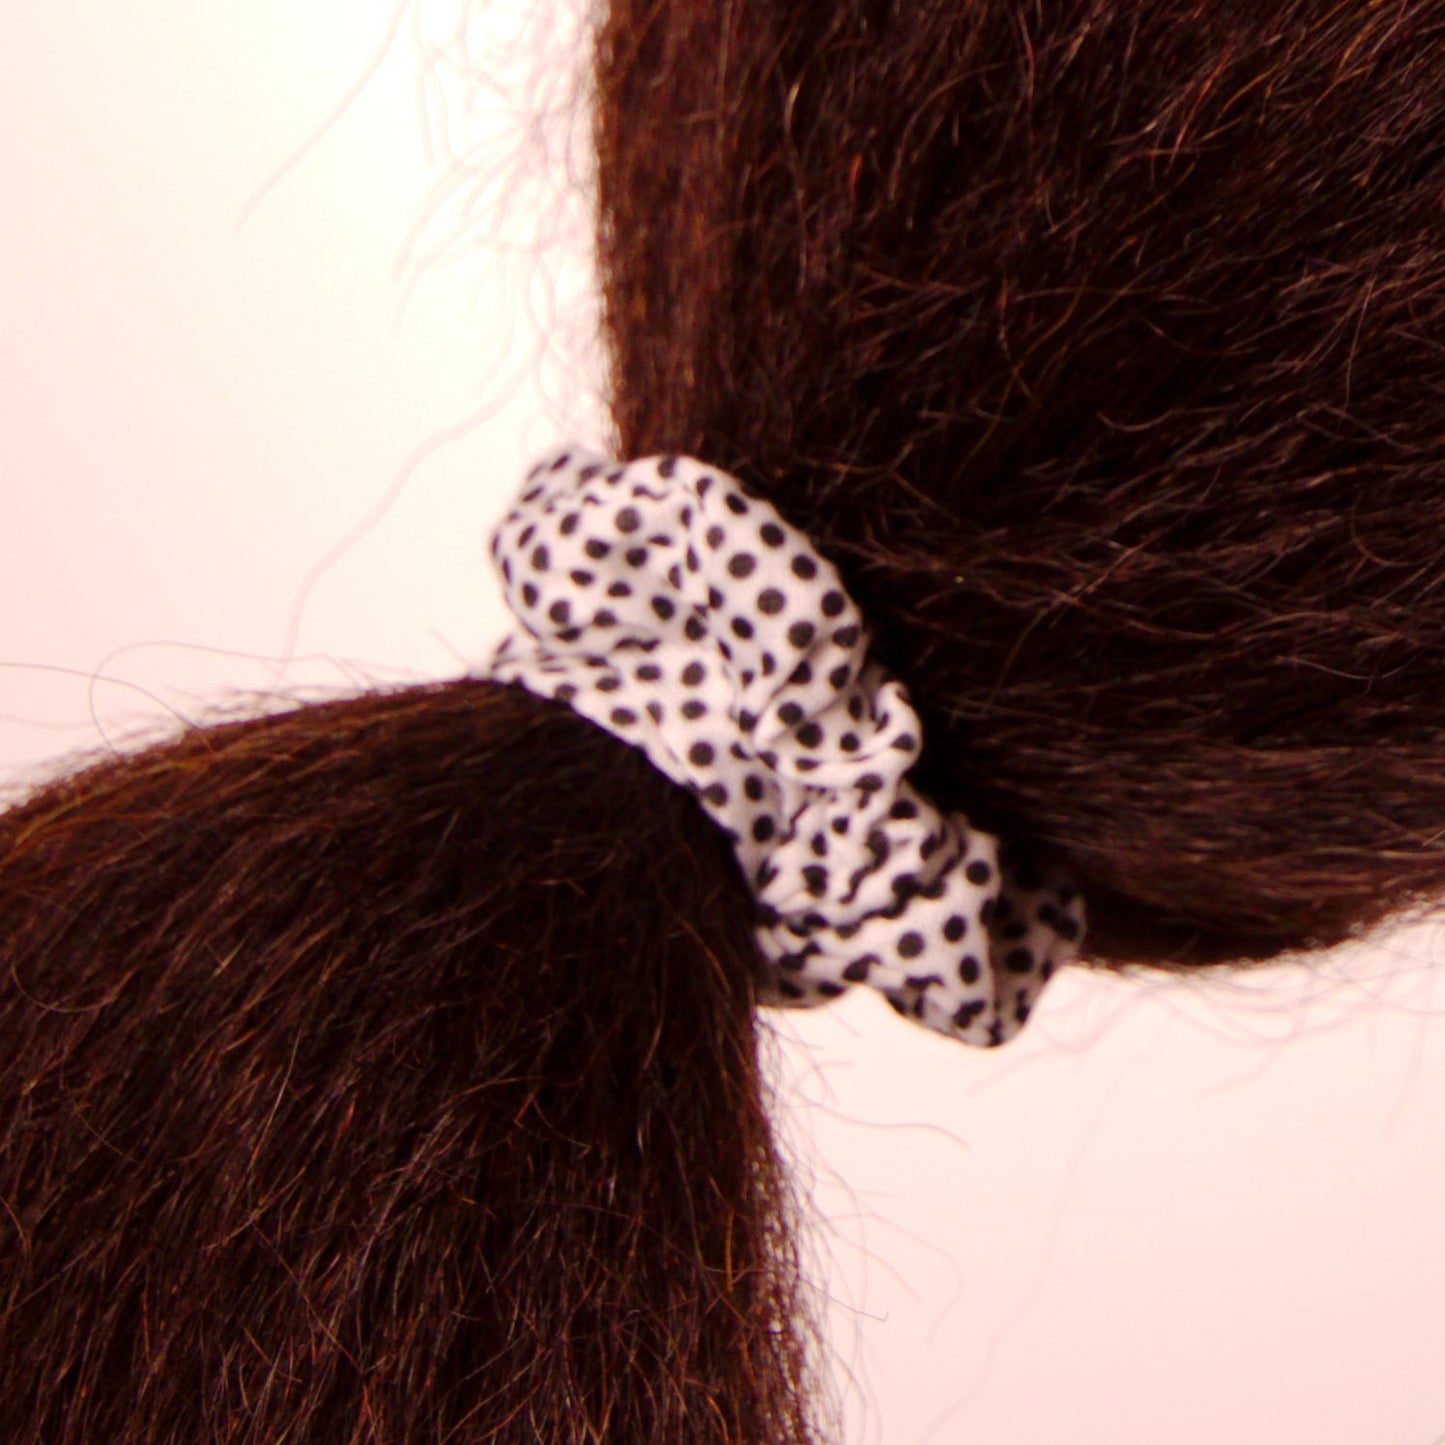 Amelia Beauty, Medium White with Black Polka Dot Jersey Scrunchies, 2.5in Diameter, Gentle on Hair, Strong Hold, No Snag, No Dents or Creases. 10 Pack